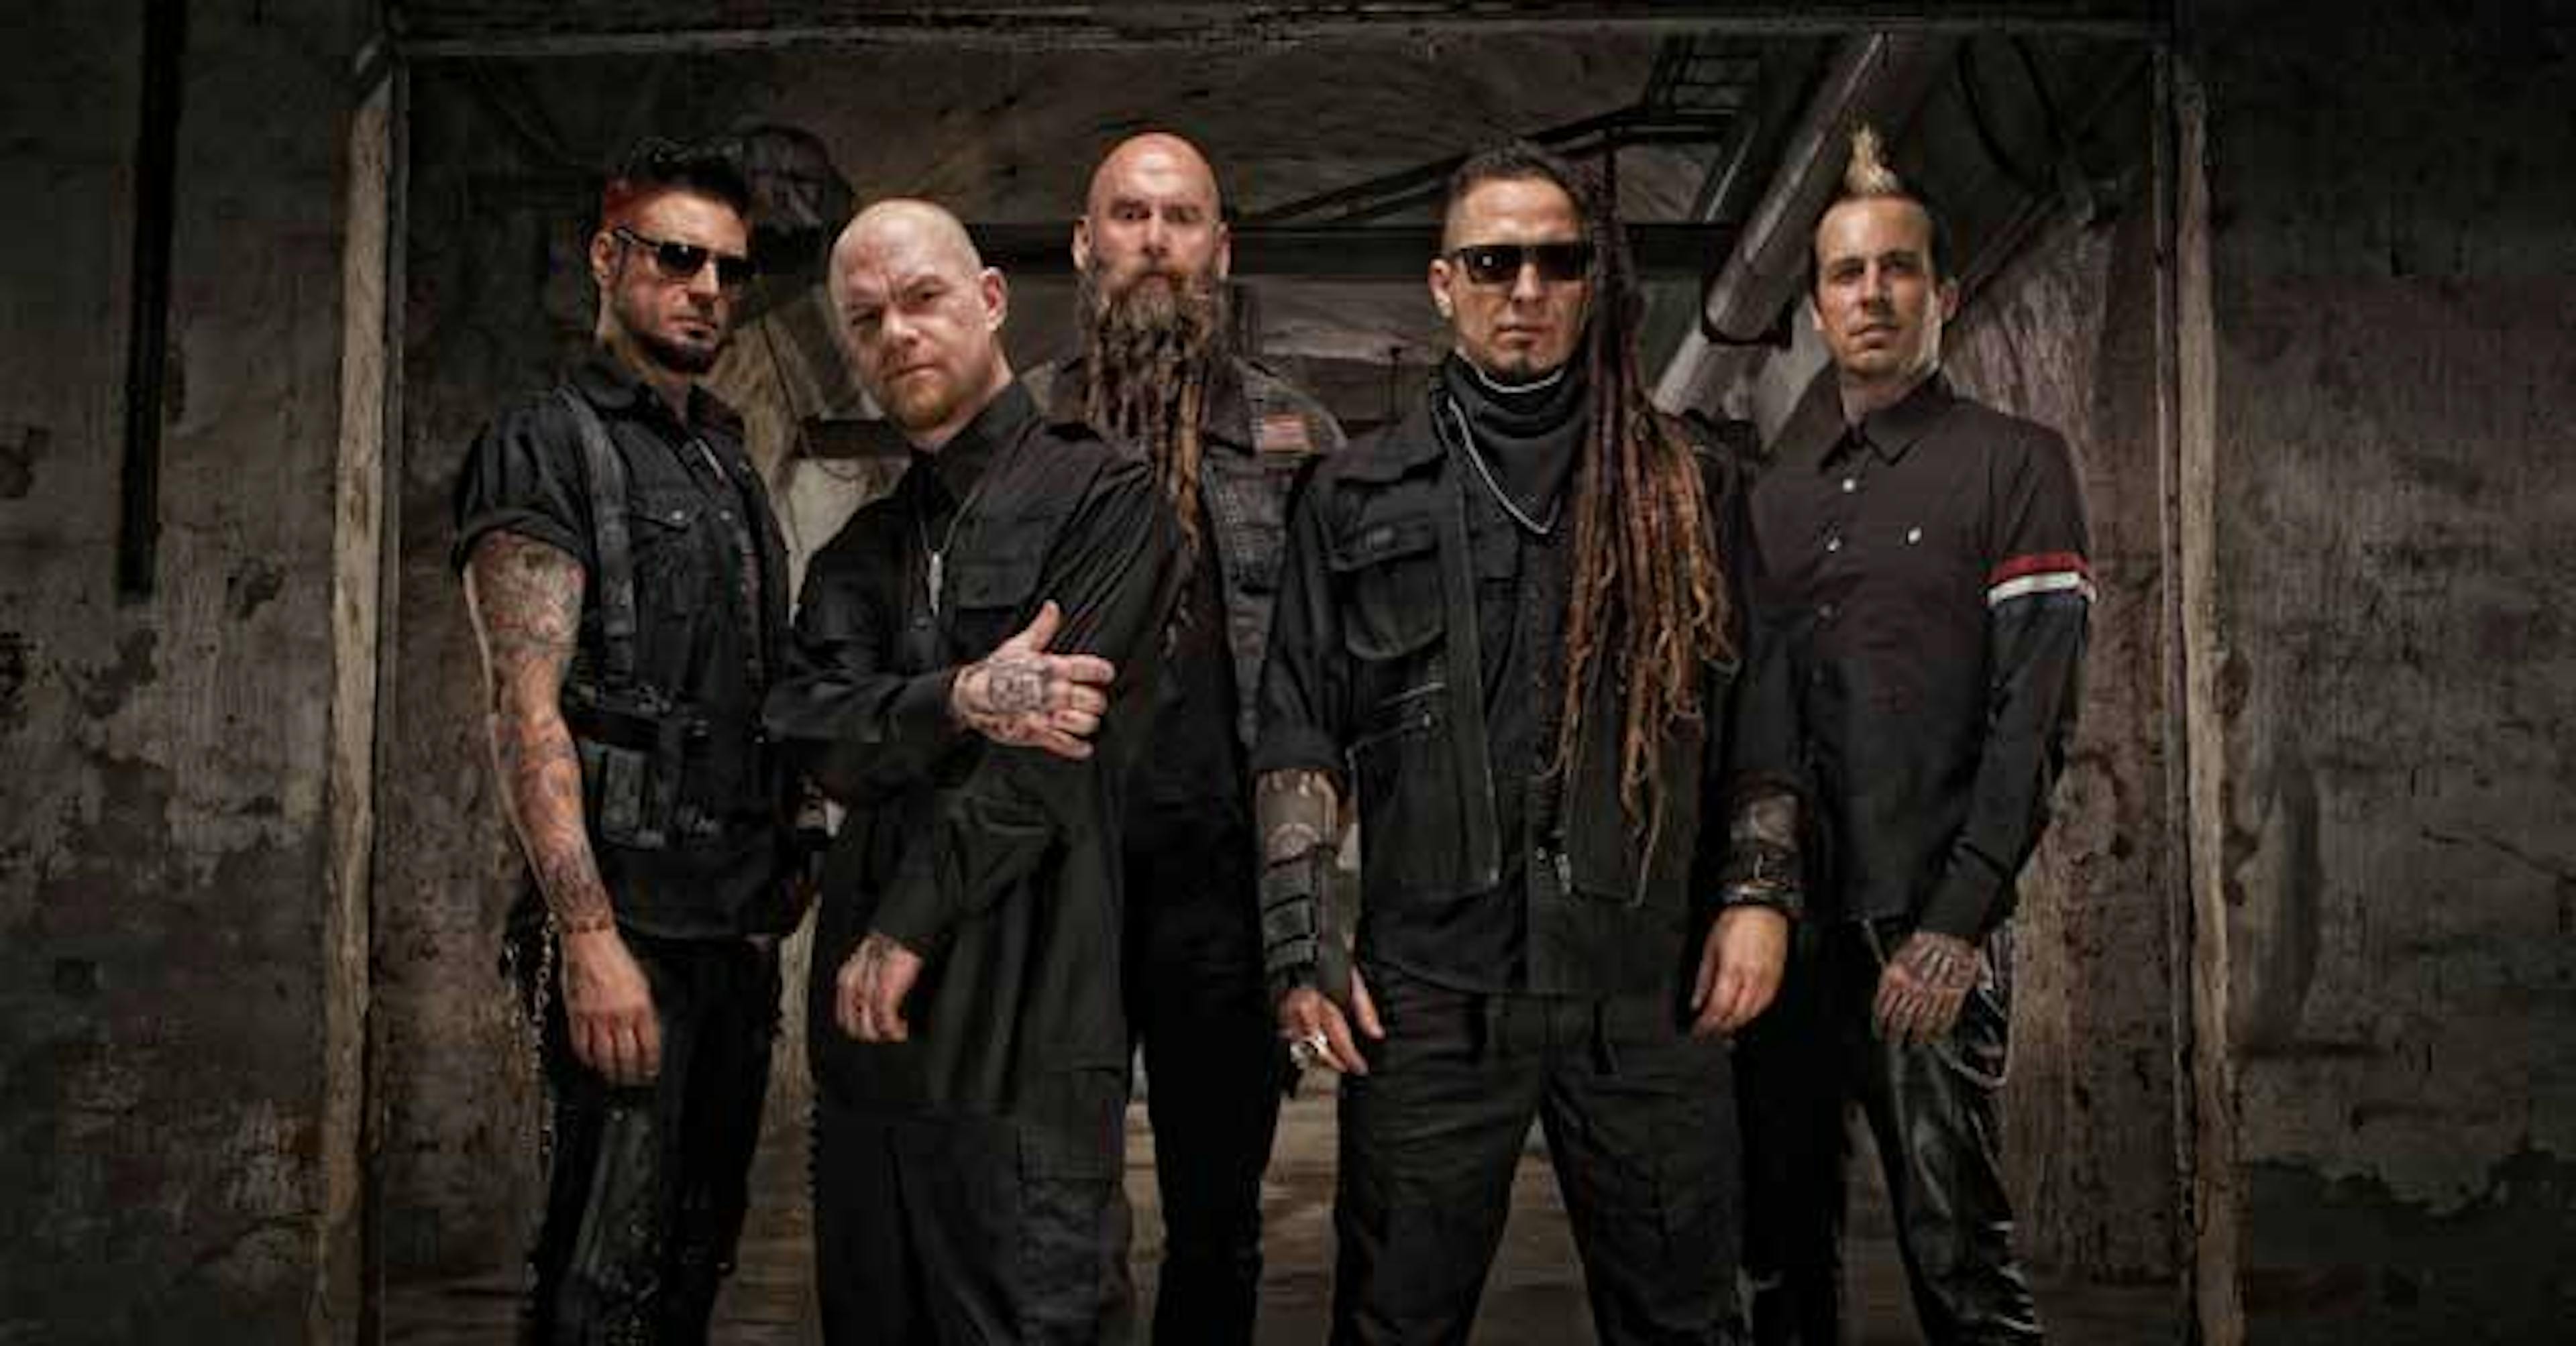 Five Finger Death Punch Debut New Video, Wash It All Away